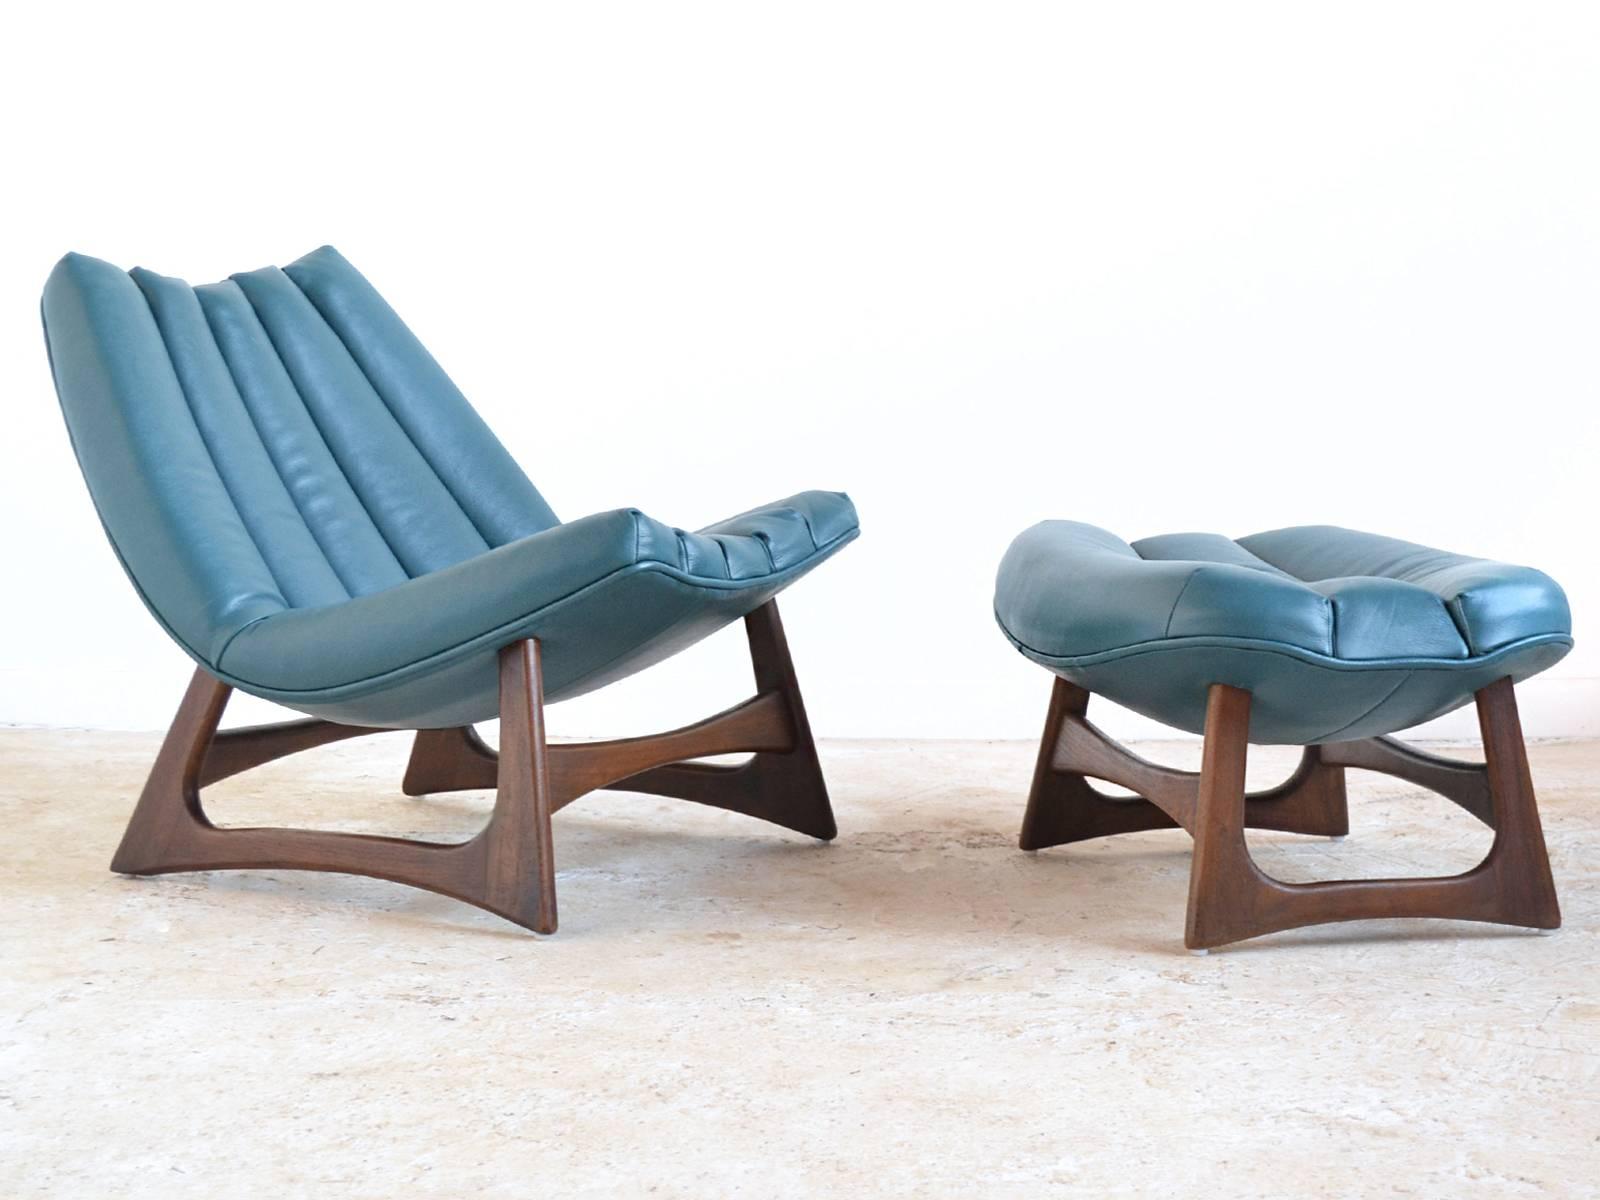 Many of the best Adrian Pearsall designs combine fluid lines and sculptural wood bases. This uncommon lounge chair and ottoman have both of those qualities. The walnut bases support the chair and ottoman which both have curved bottoms creating a